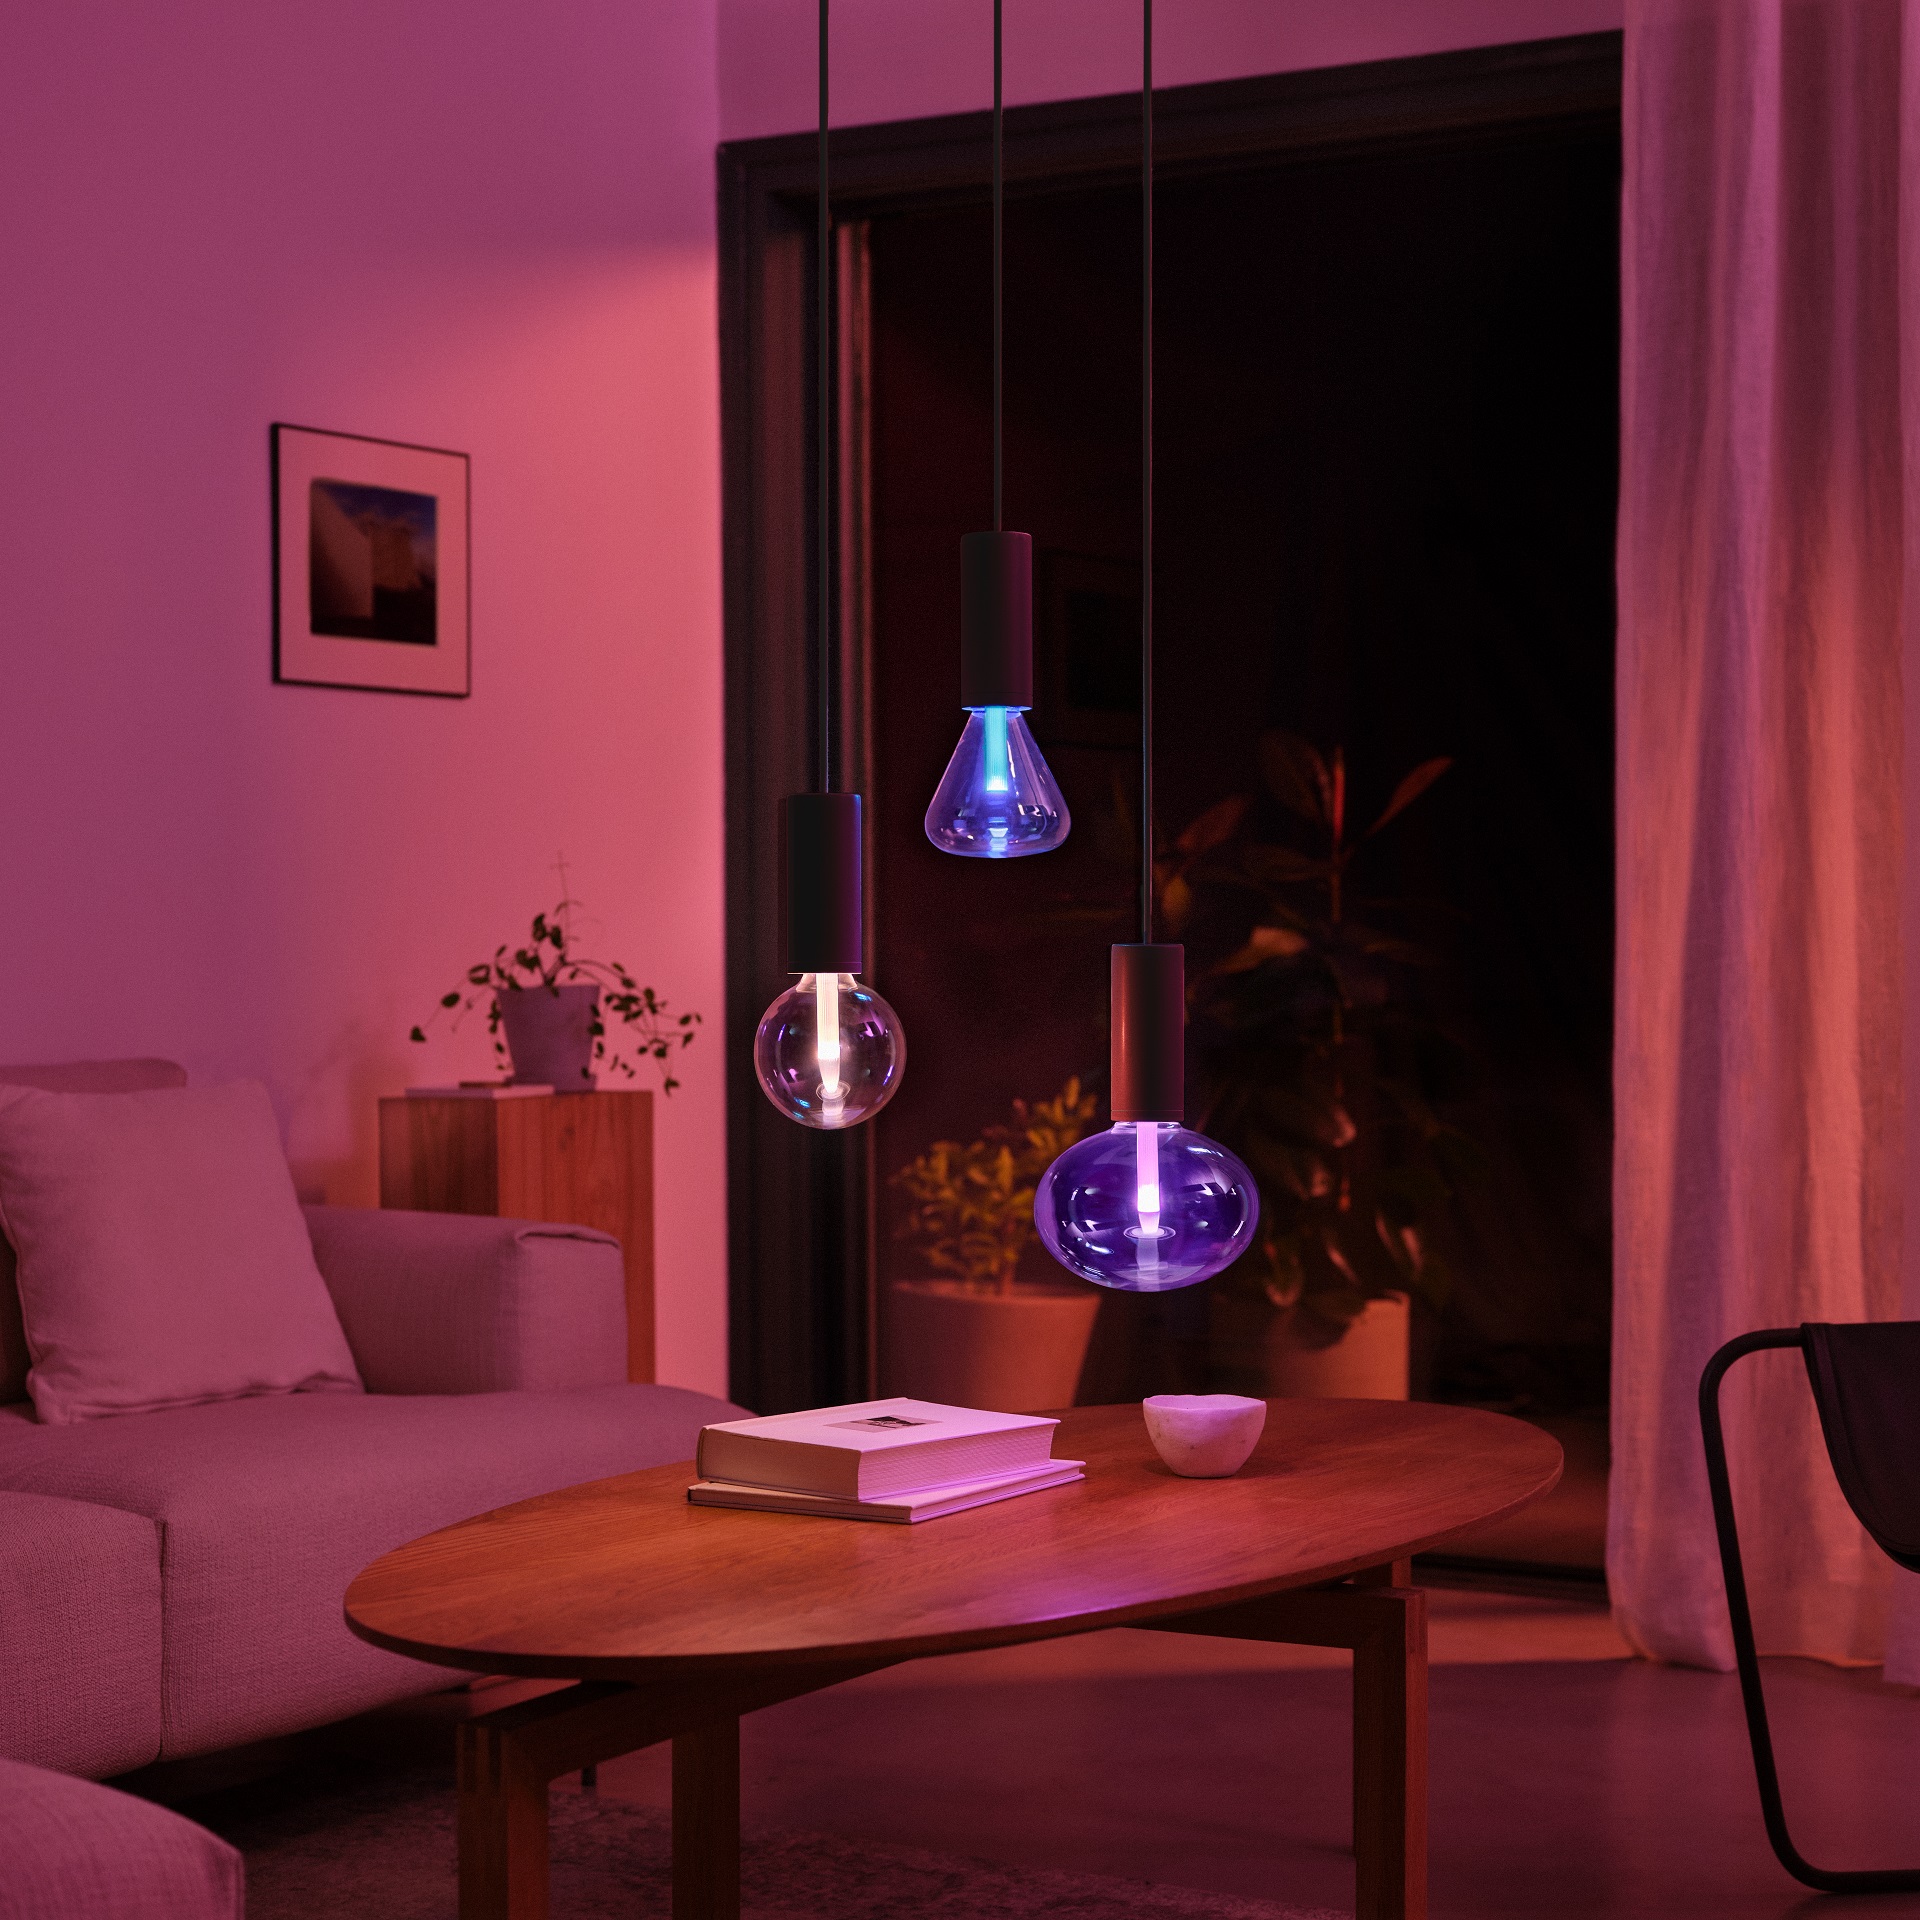 Philips Hue Lightguide bulbs and matching pendant light cords lifestyle 1